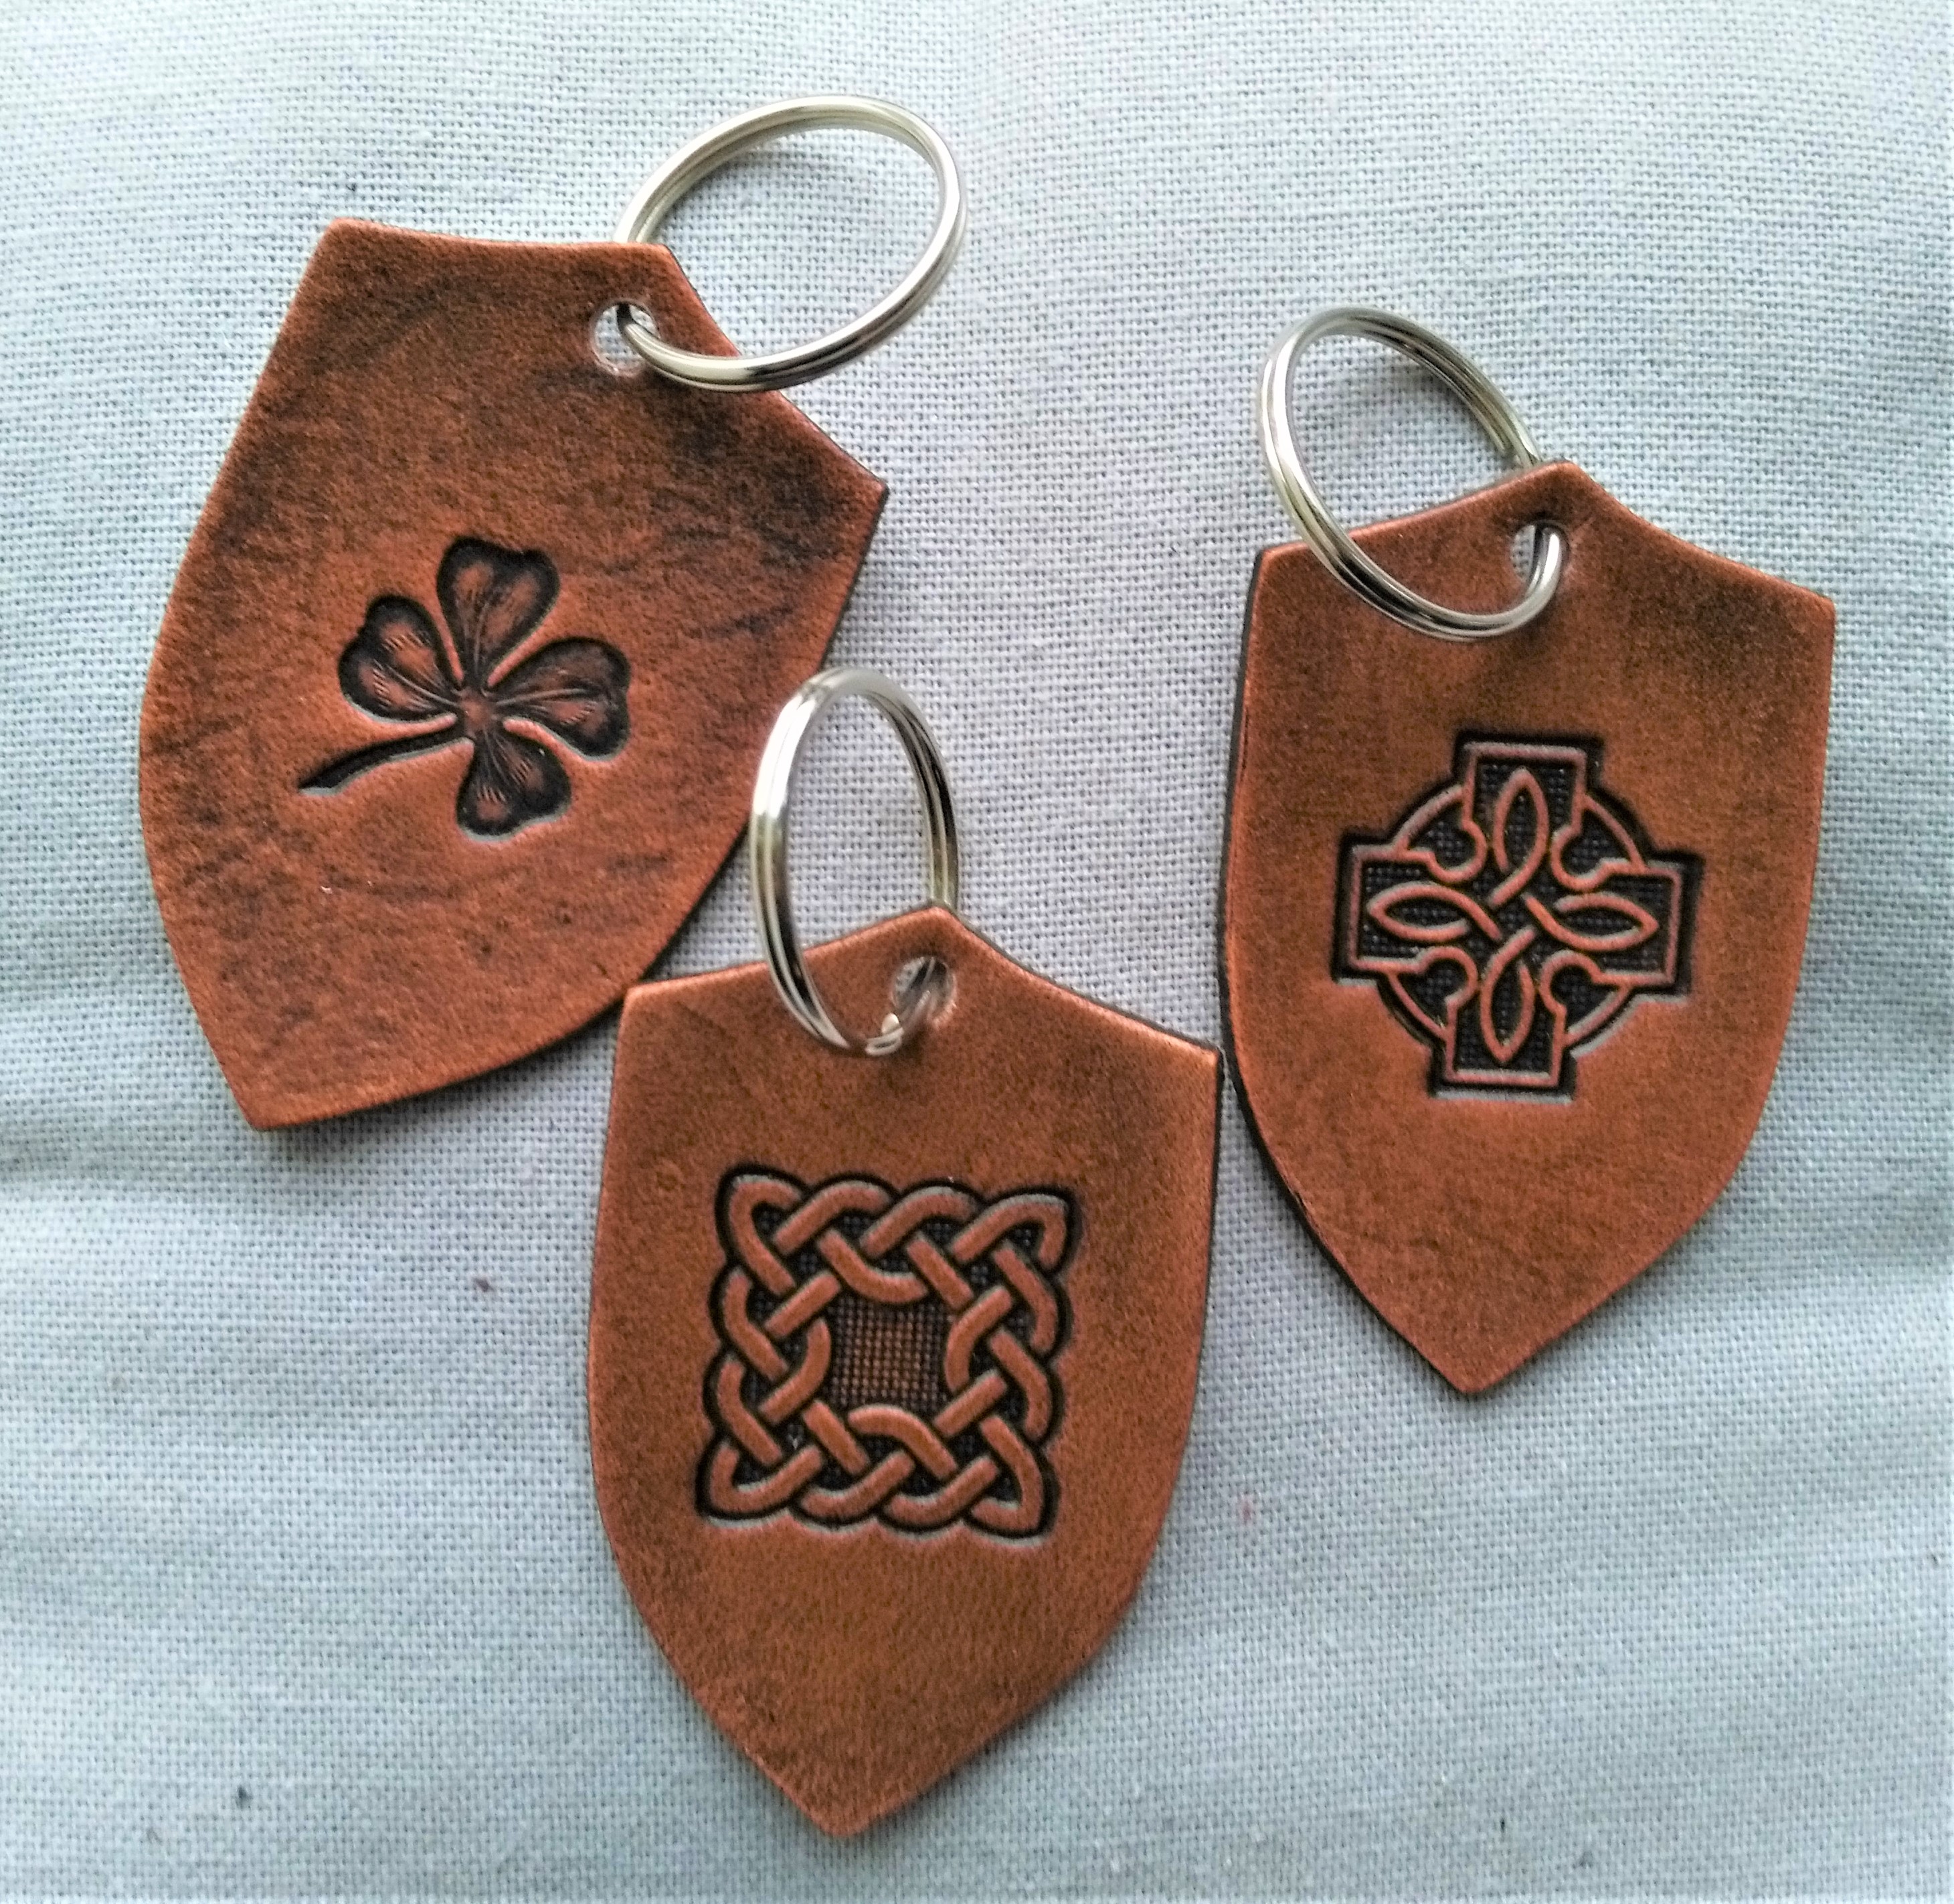 https://cdn.merch.systems/stores/celticleathercraft/img/celtic-leather-craft-Oxiw1R.jpg